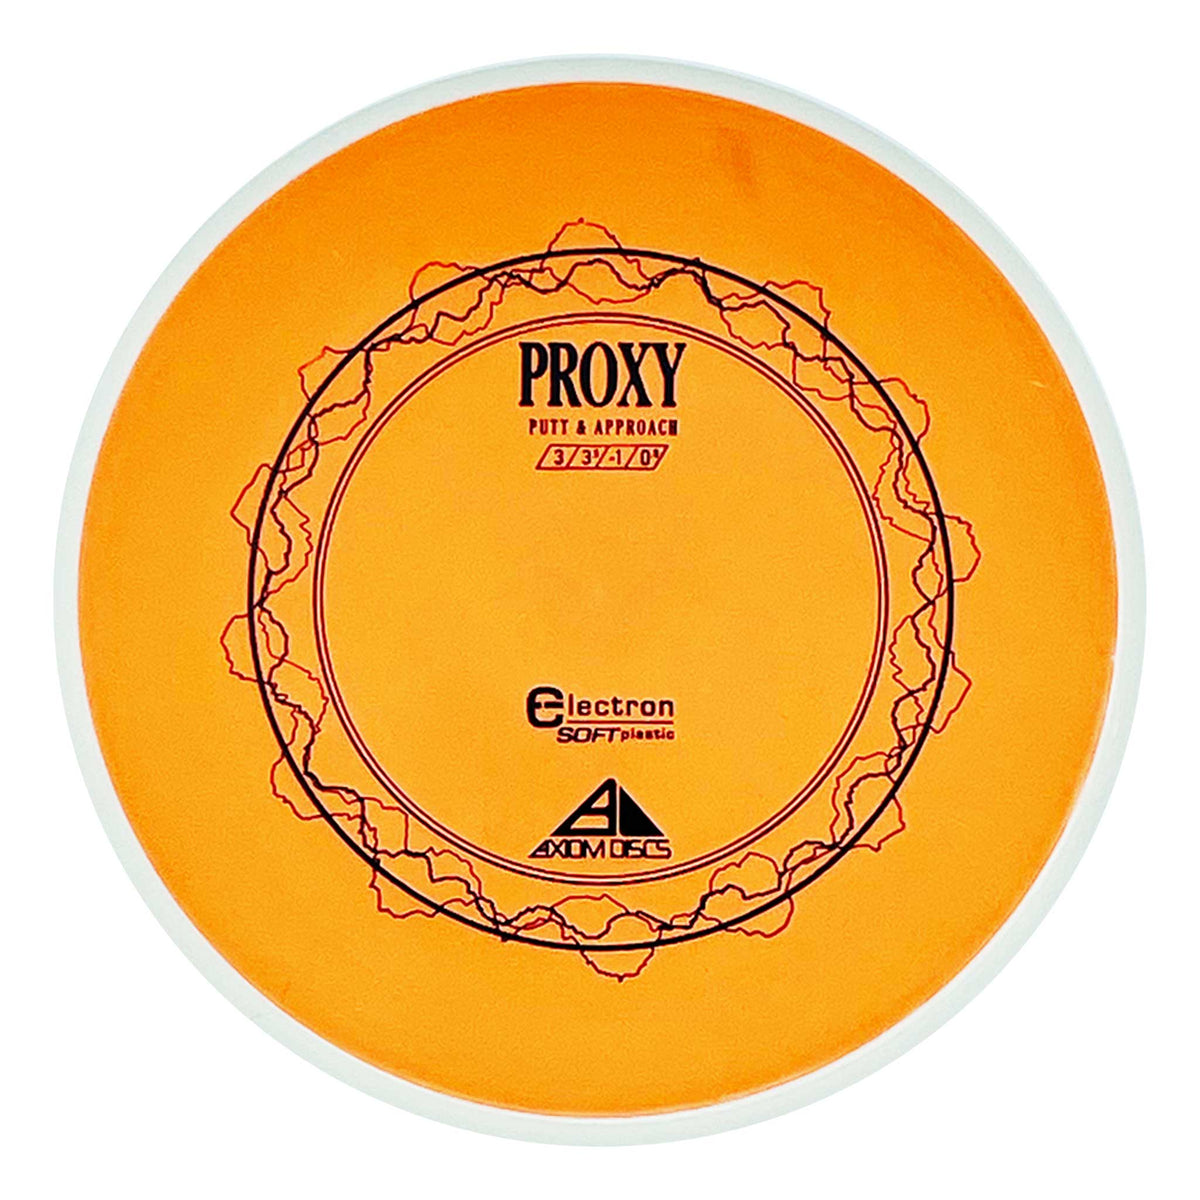 Axiom Discs Electron Soft Proxy putter and approach White/Orange